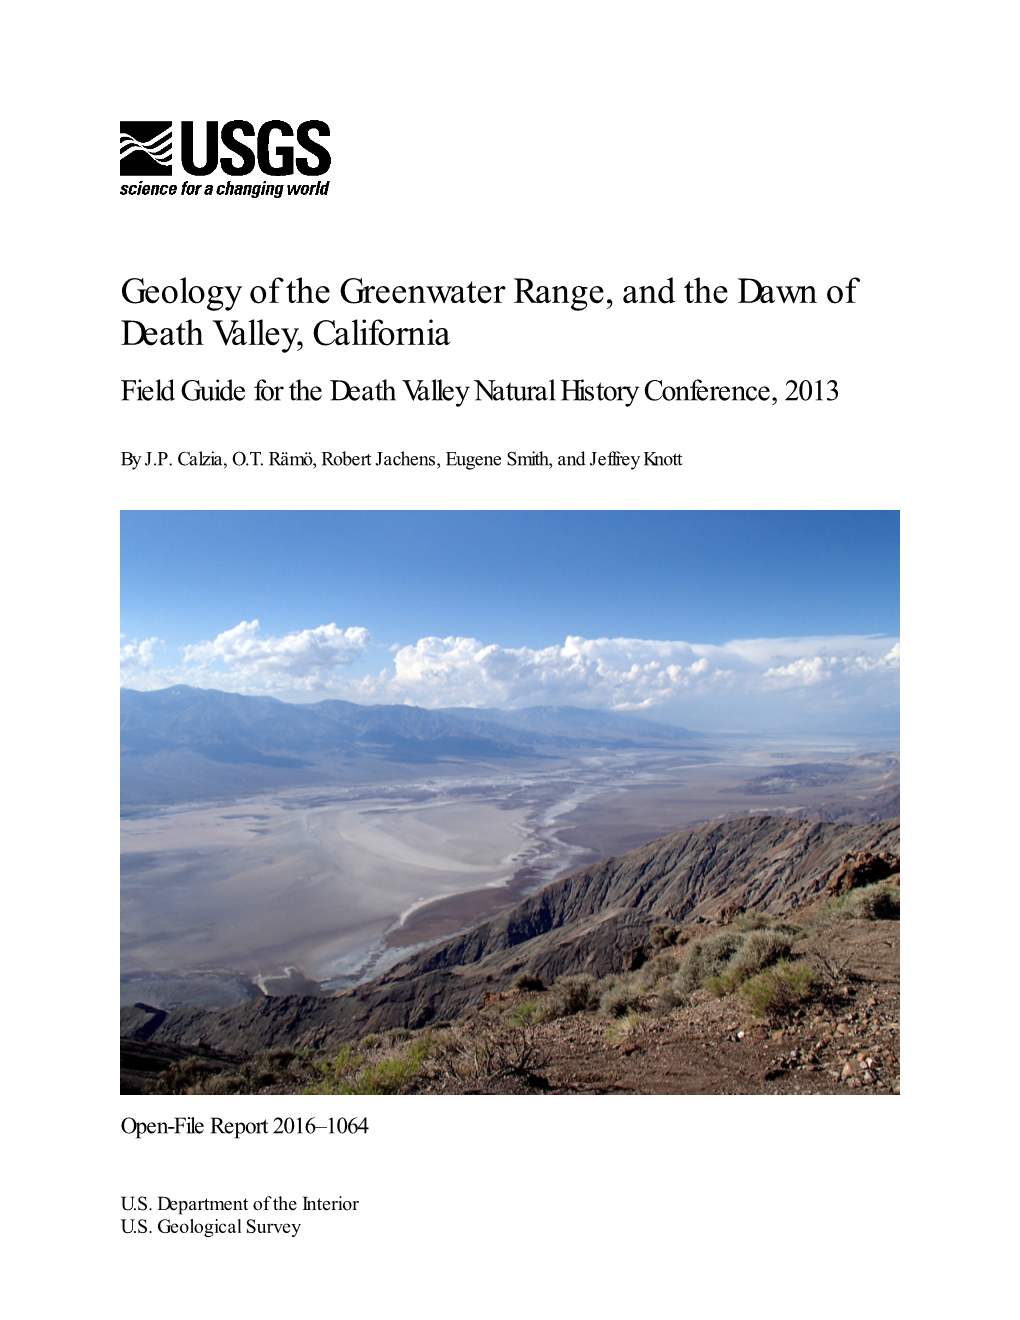 Geology of the Greenwater Range, and the Dawn of Death Valley, California Field Guide for the Death Valley Natural History Conference, 2013